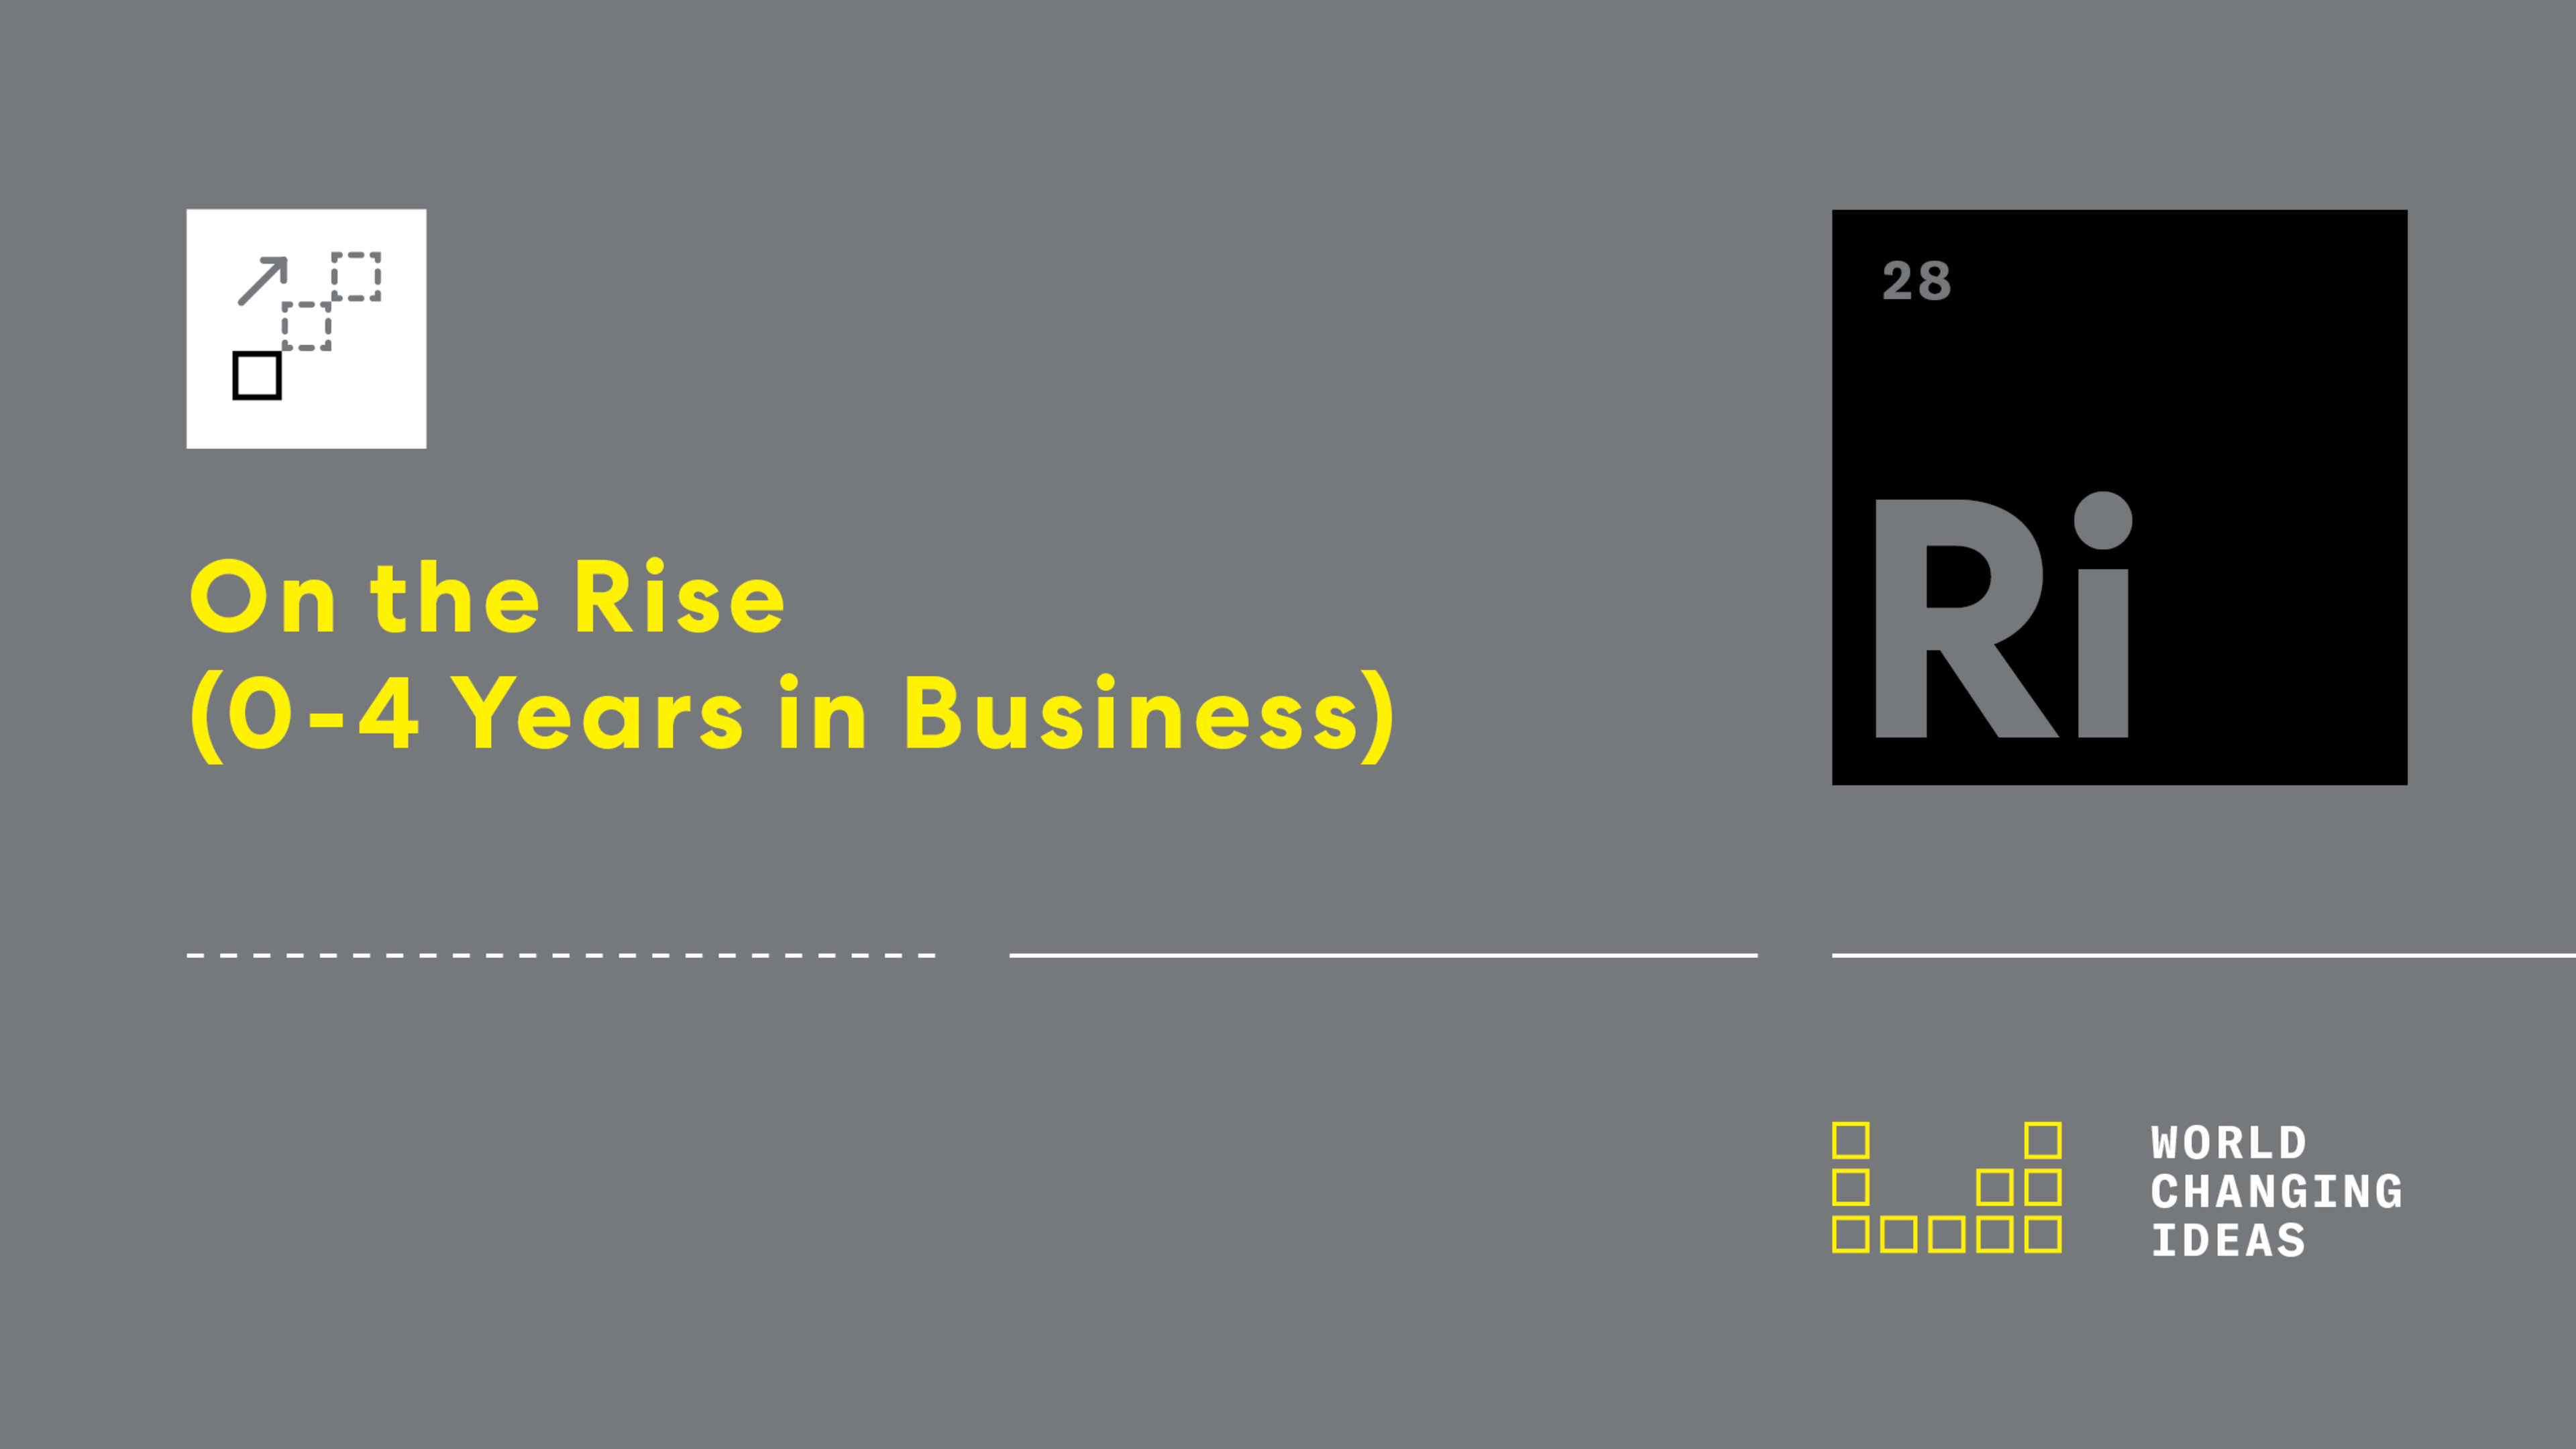 World Changing Ideas Awards 2021: On The Rise (0-4 Years In Business) Finalists and Honorable Mentions